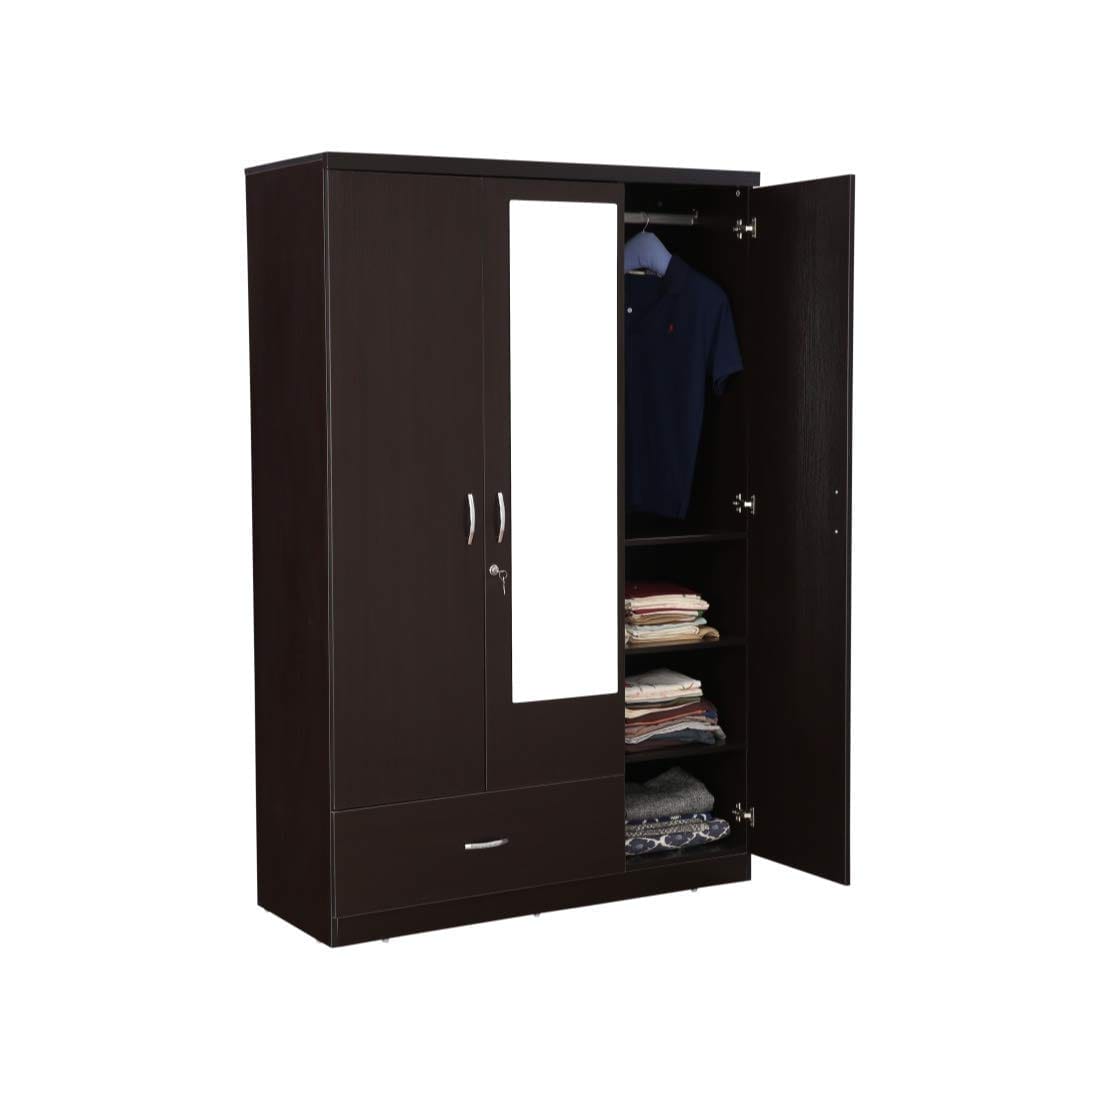 Walnut Colour 3 Door Wardrobe With 2 Drawers , Shelves And Hanging Space For Clothes | Wardrobe For Clothes